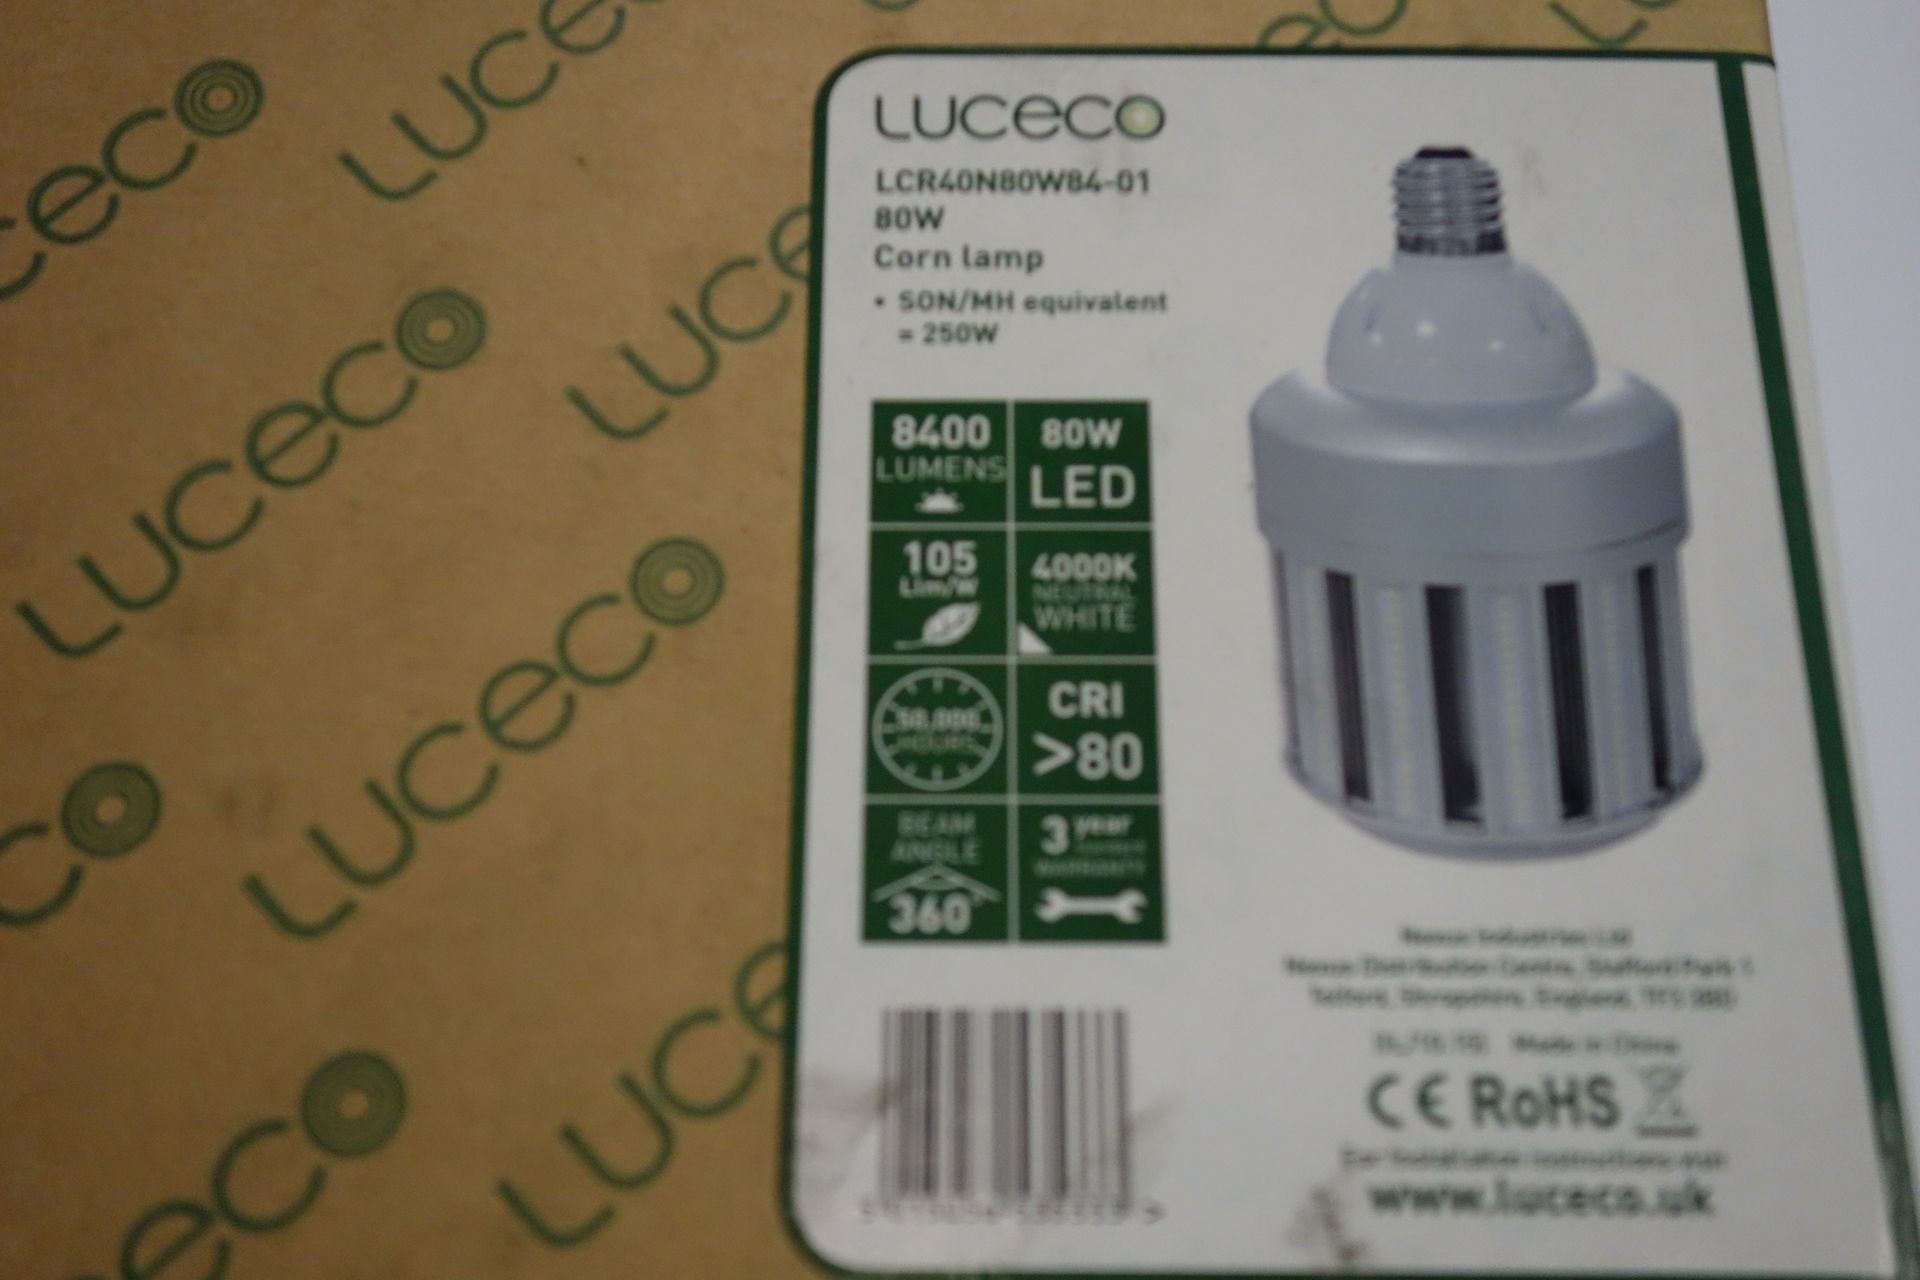 6 X Luceco LCR40N80W 84-01 Corn Lamps 80W LED 4000K Neutral White 8400 Lumens Son/MH Equivlent =